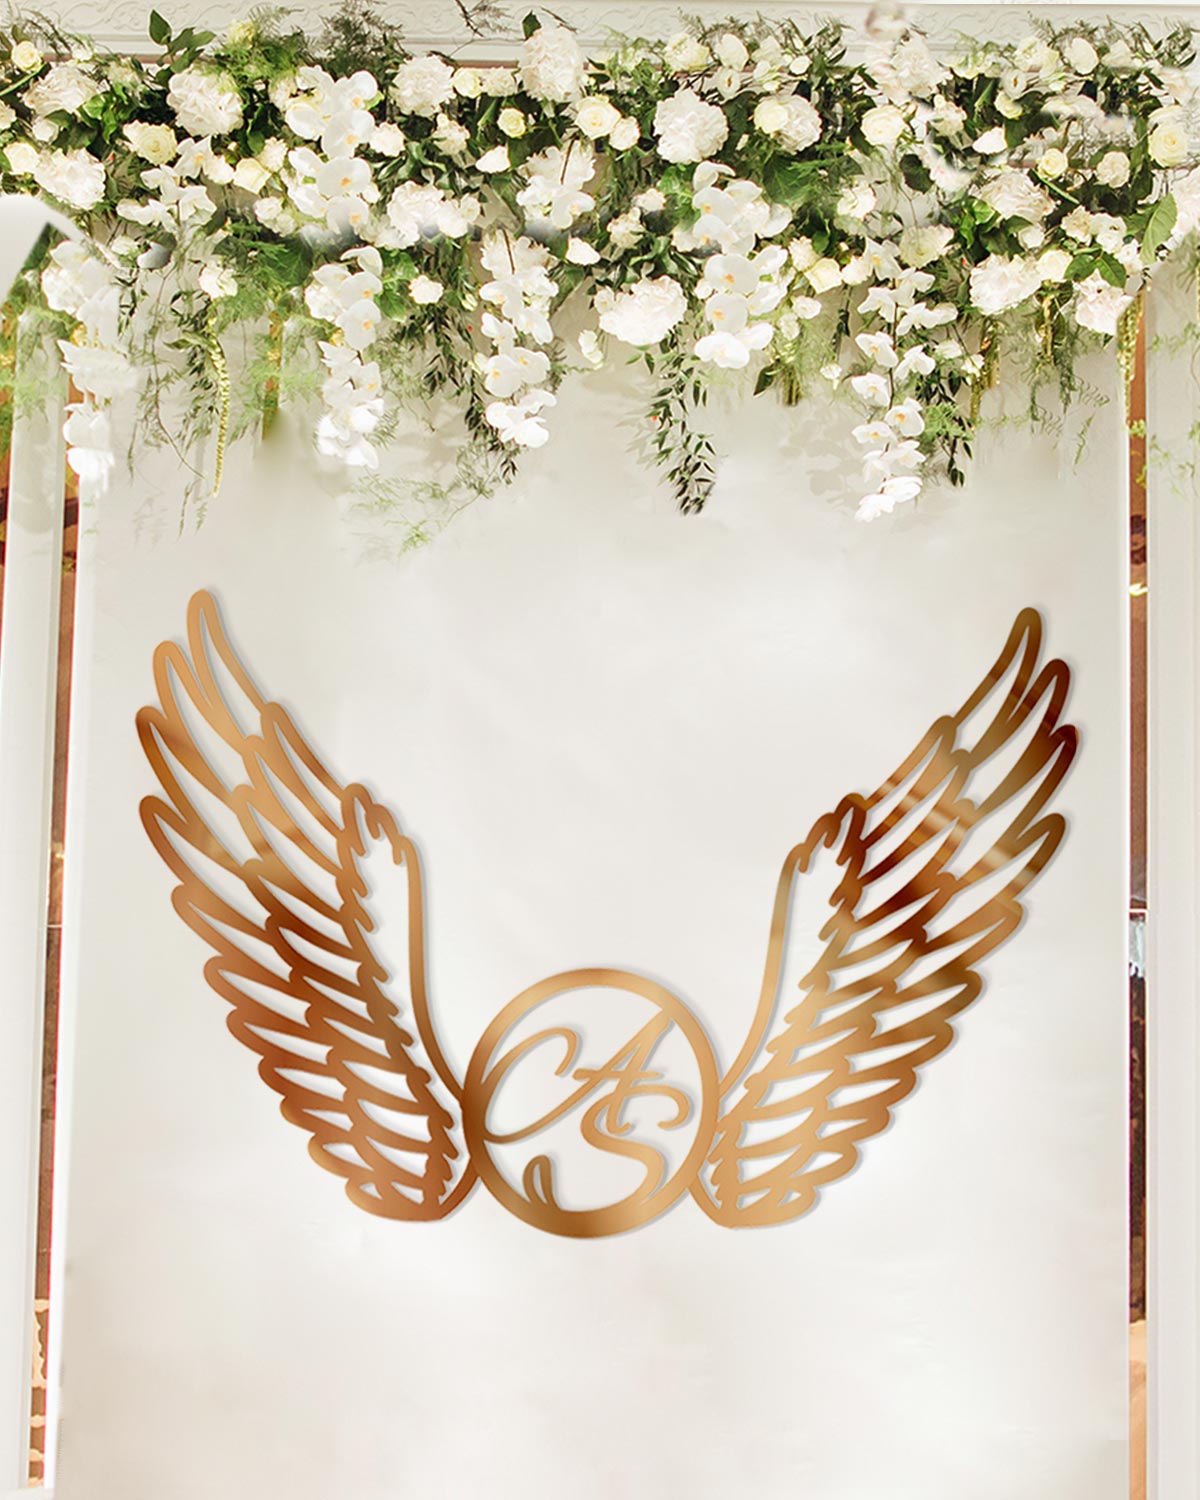 Fall in Love With These Large Wedding Decorations